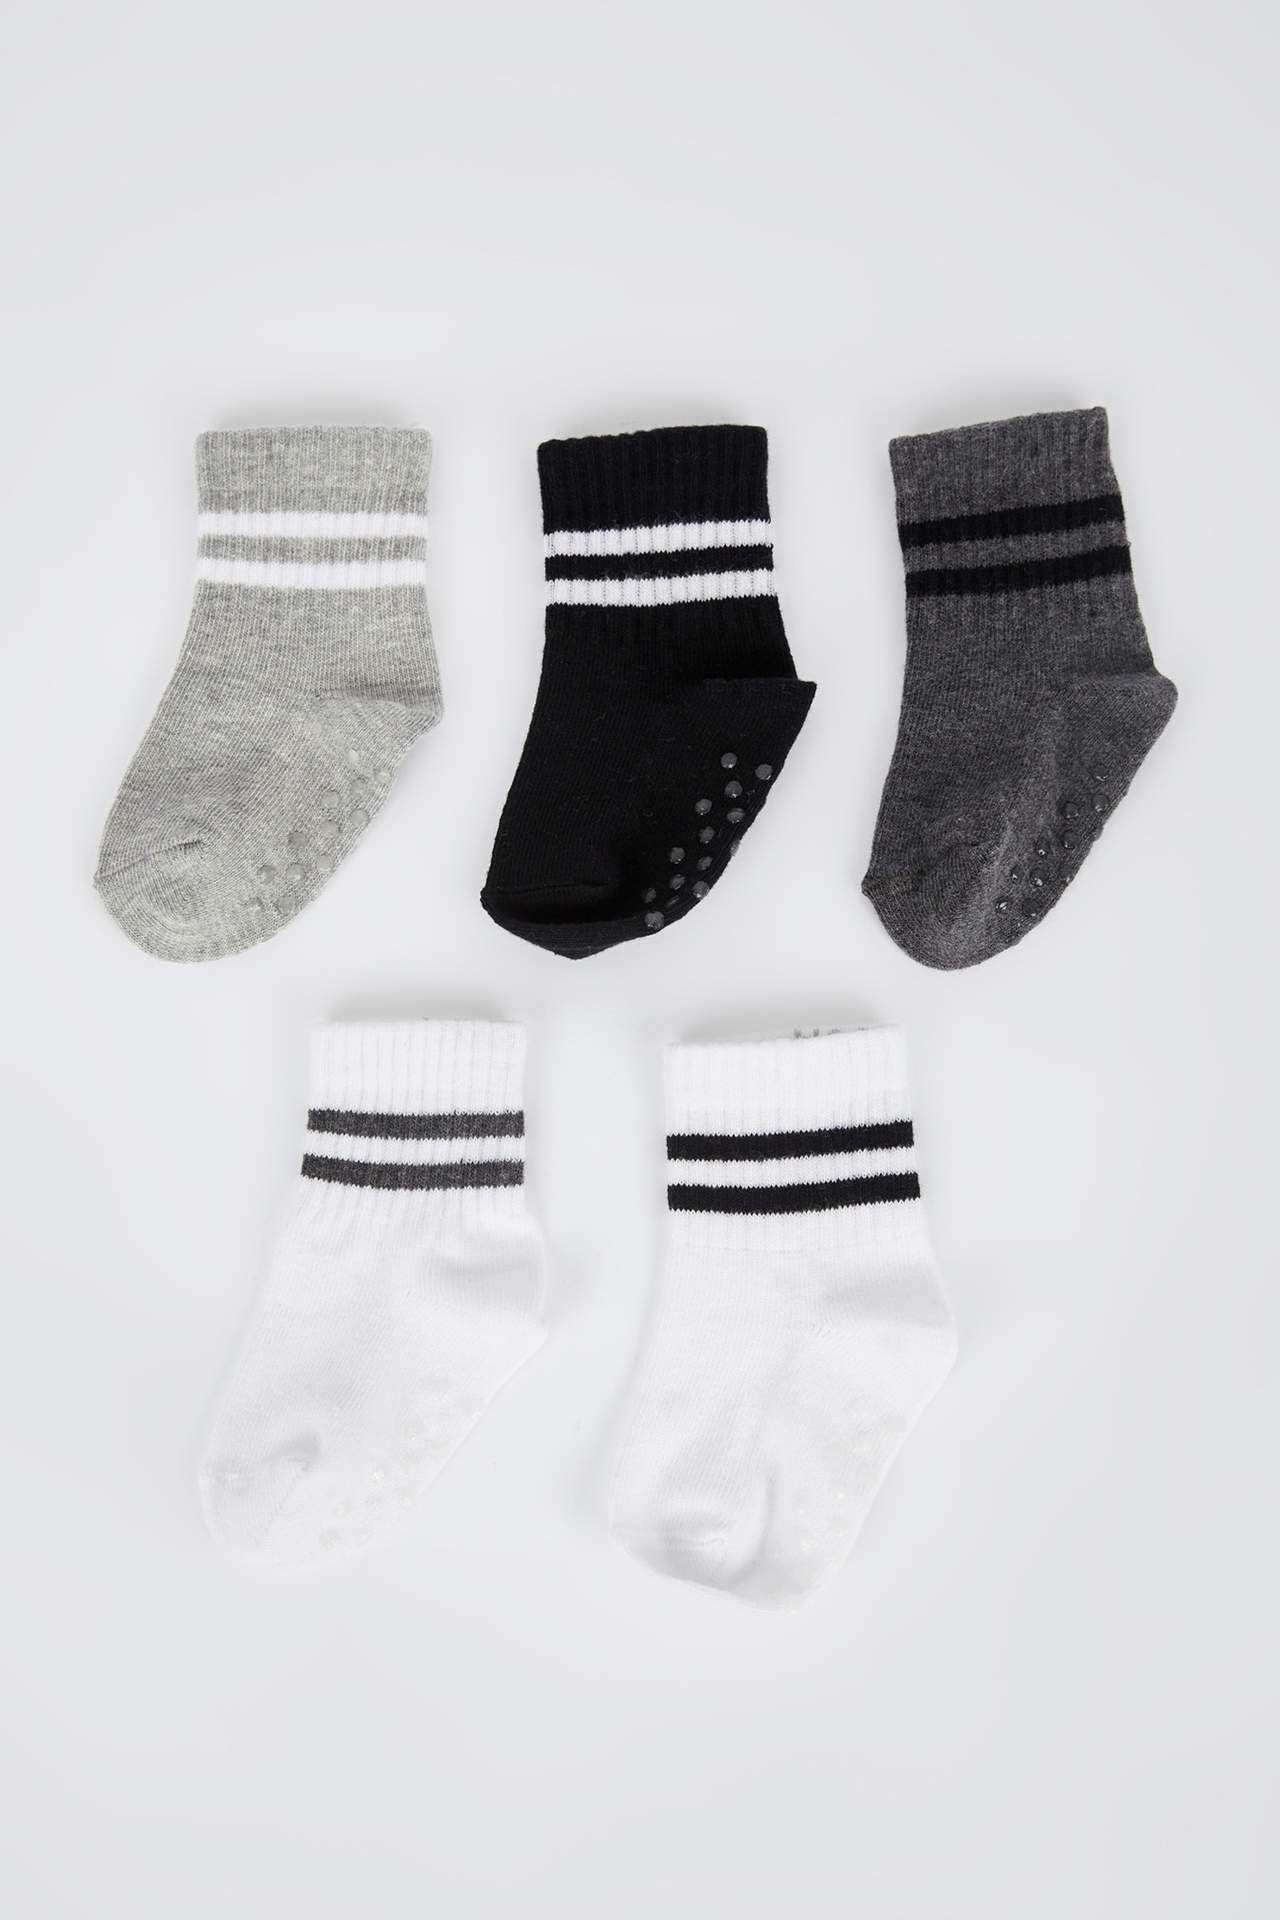 DEFACTO 5 Pack Long Socks For Baby Boys With Non-Slip Soles